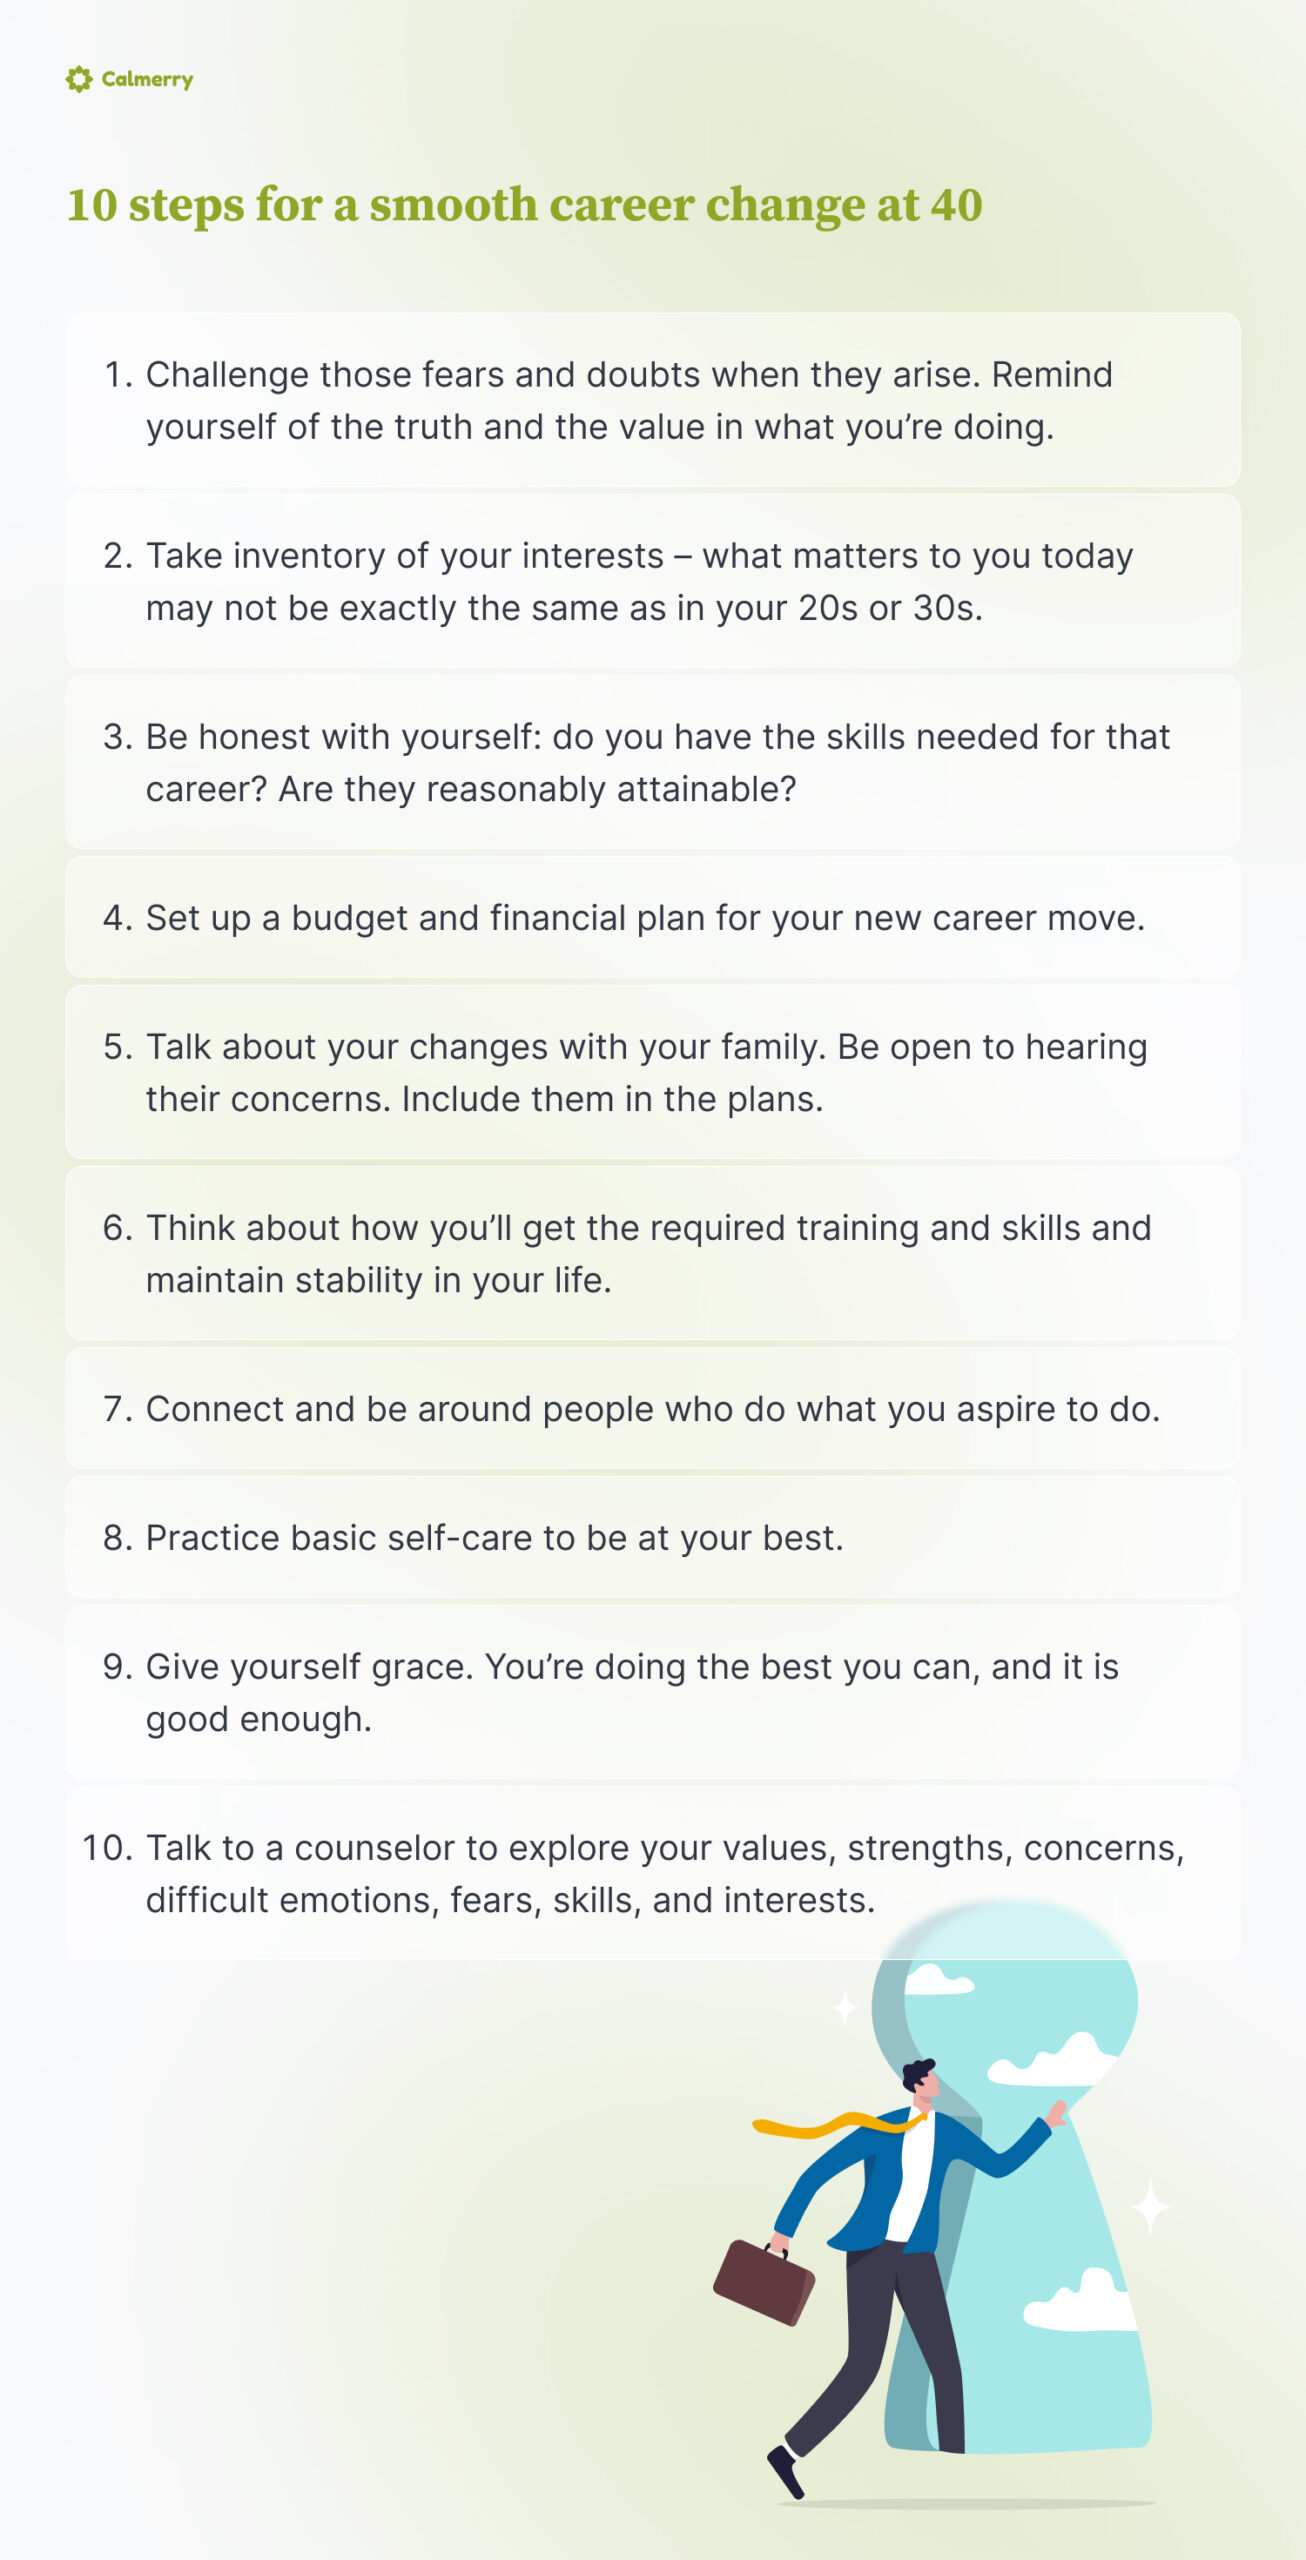 10 steps for a smooth career change at 40 
Challenge those fears and doubts when they arise. Remind yourself of the truth and the value in what you’re doing. 
Take inventory of your interests – what matters to you today may not be exactly the same as in your 20s or 30s.
Be honest with yourself: do you have the skills needed for that career? Are they reasonably attainable? 
Set up a budget and financial plan for your new career move.
Talk about your changes with your family. Be open to hearing their concerns. Include them in the plans. 
Think about how you’ll get the required training and skills and maintain stability in your life.
Connect and be around people who do what you aspire to do.
Practice basic self-care to be at your best.
Give yourself grace. You’re doing the best you can, and it is good enough. 
 Talk to a counselor to explore your values, strengths, concerns, difficult emotions, fears, skills, and interests.